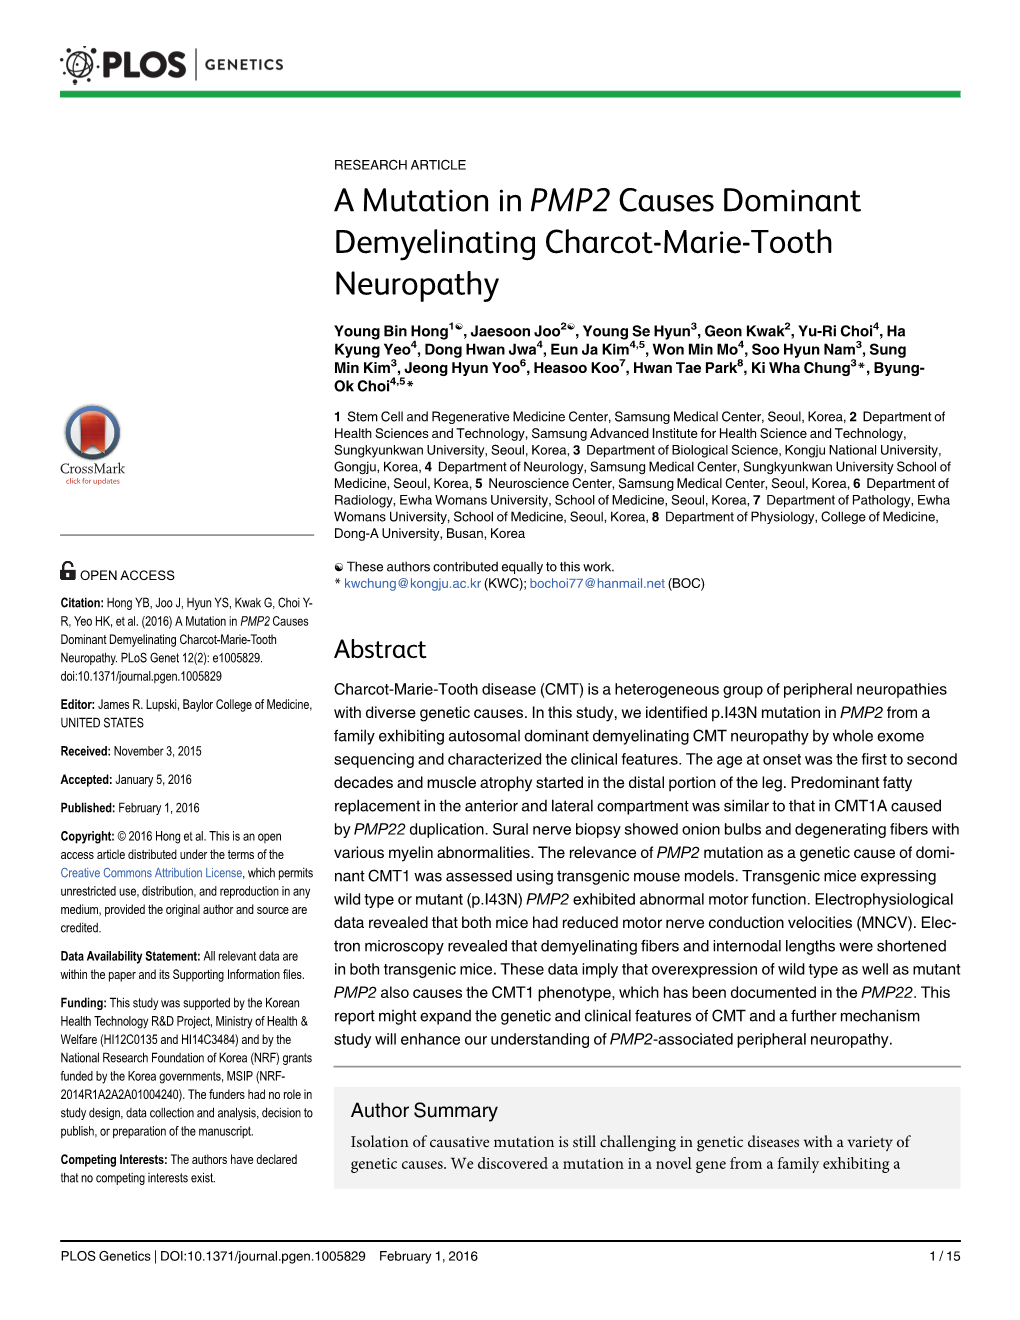 A Mutation in PMP2 Causes Dominant Demyelinating Charcot-Marie-Tooth Neuropathy